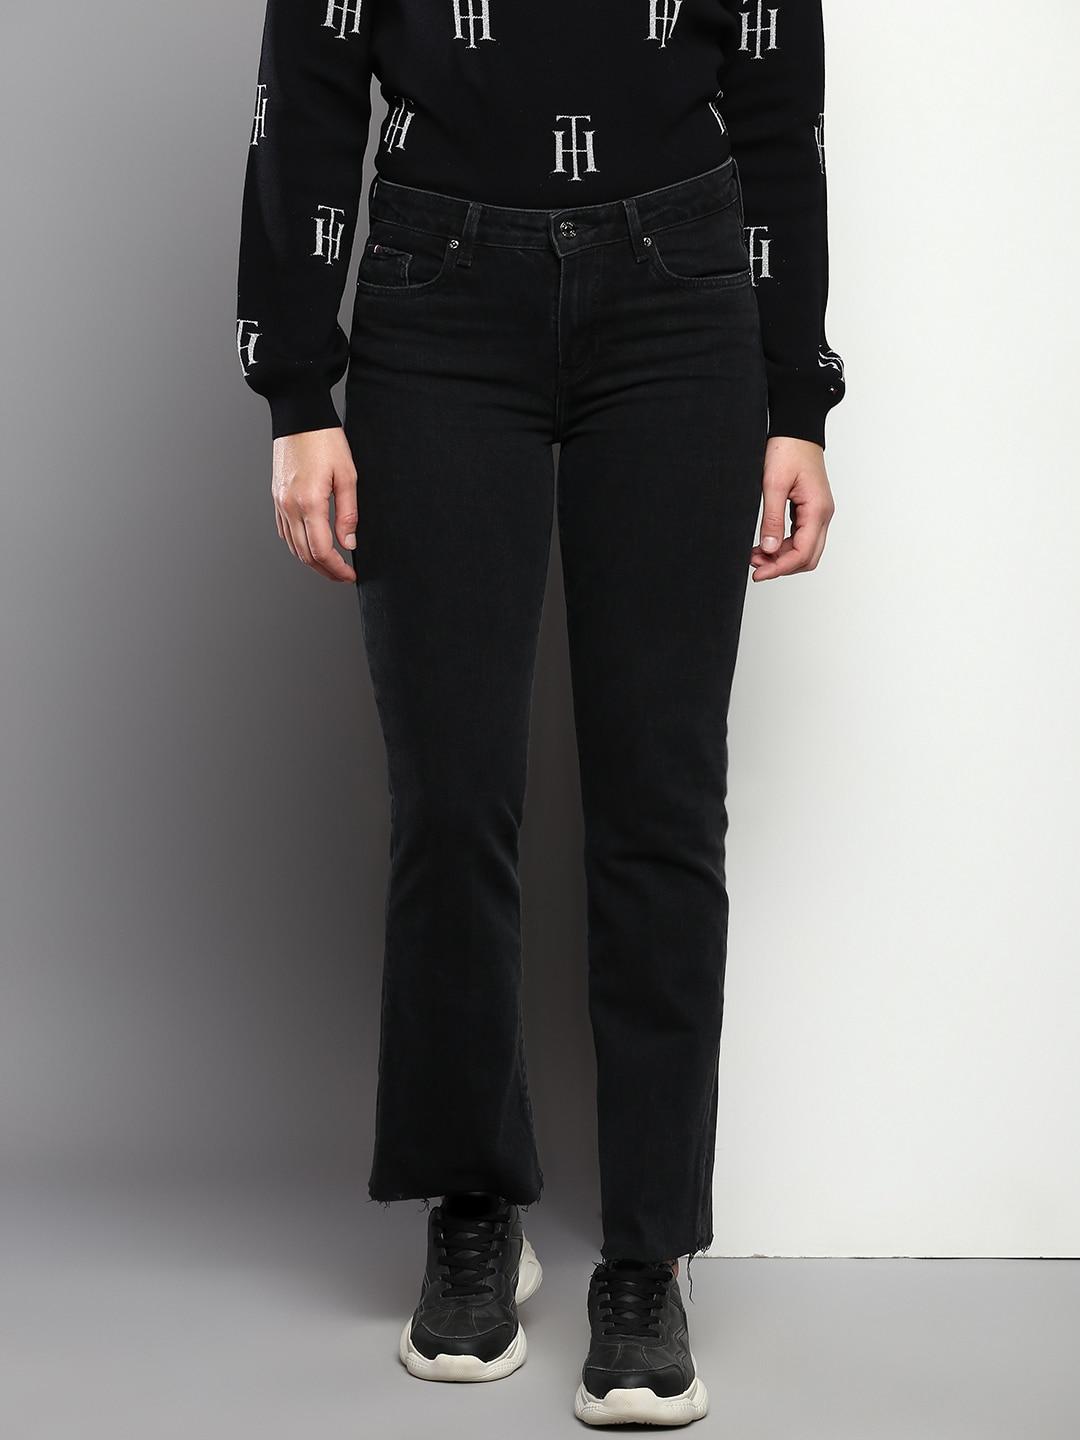 tommy-hilfiger-women-bootcut-stretchable-jeans